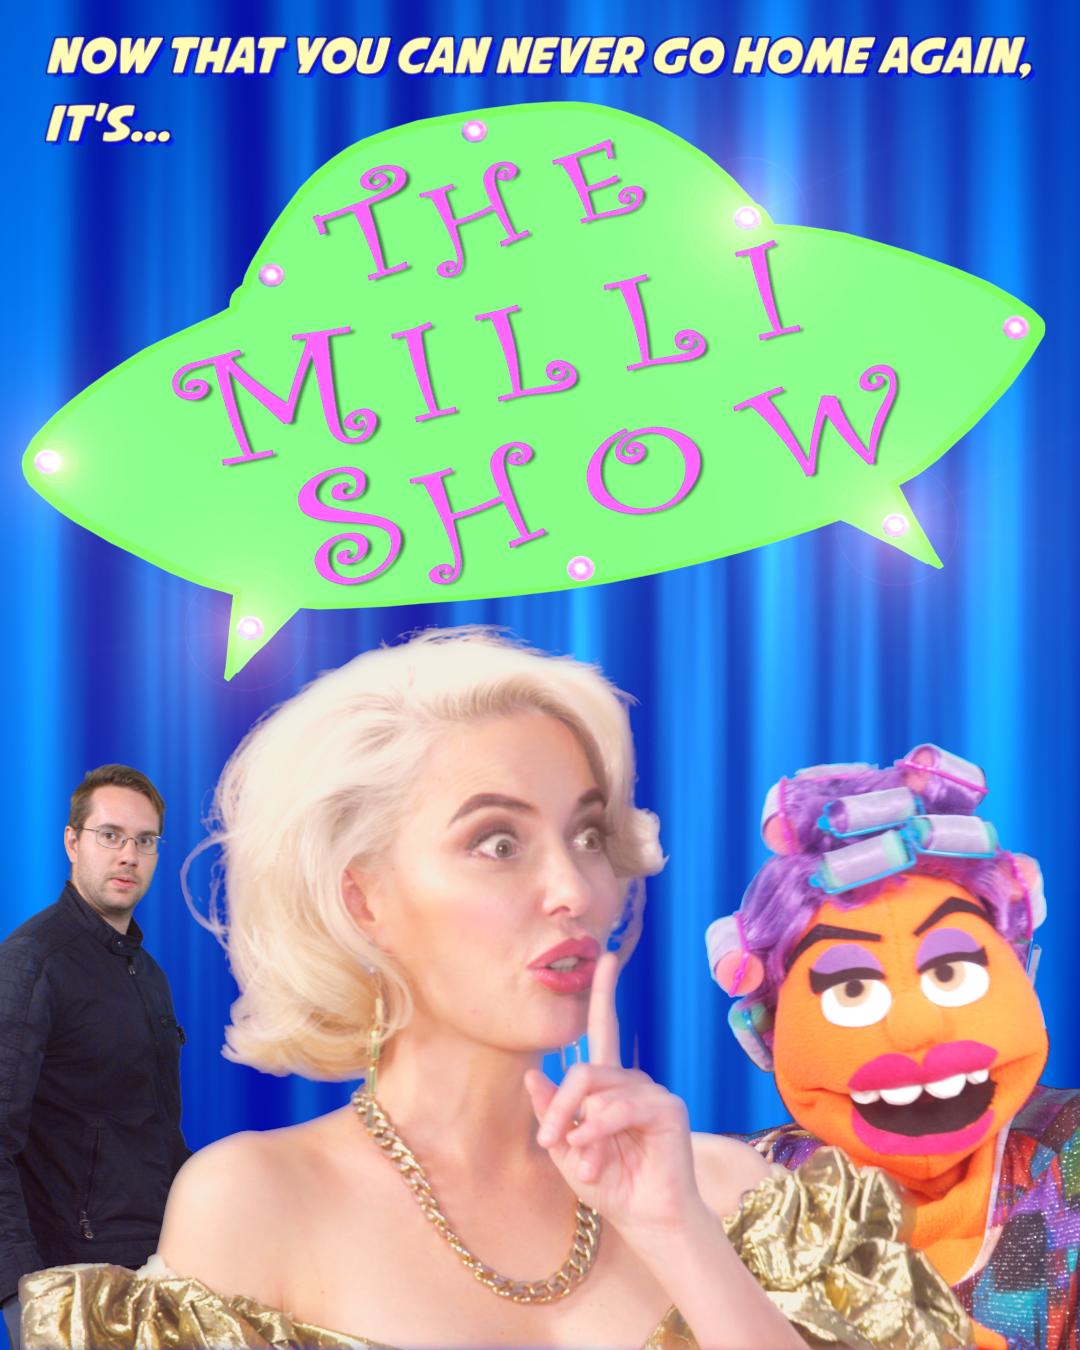 The Milli Show